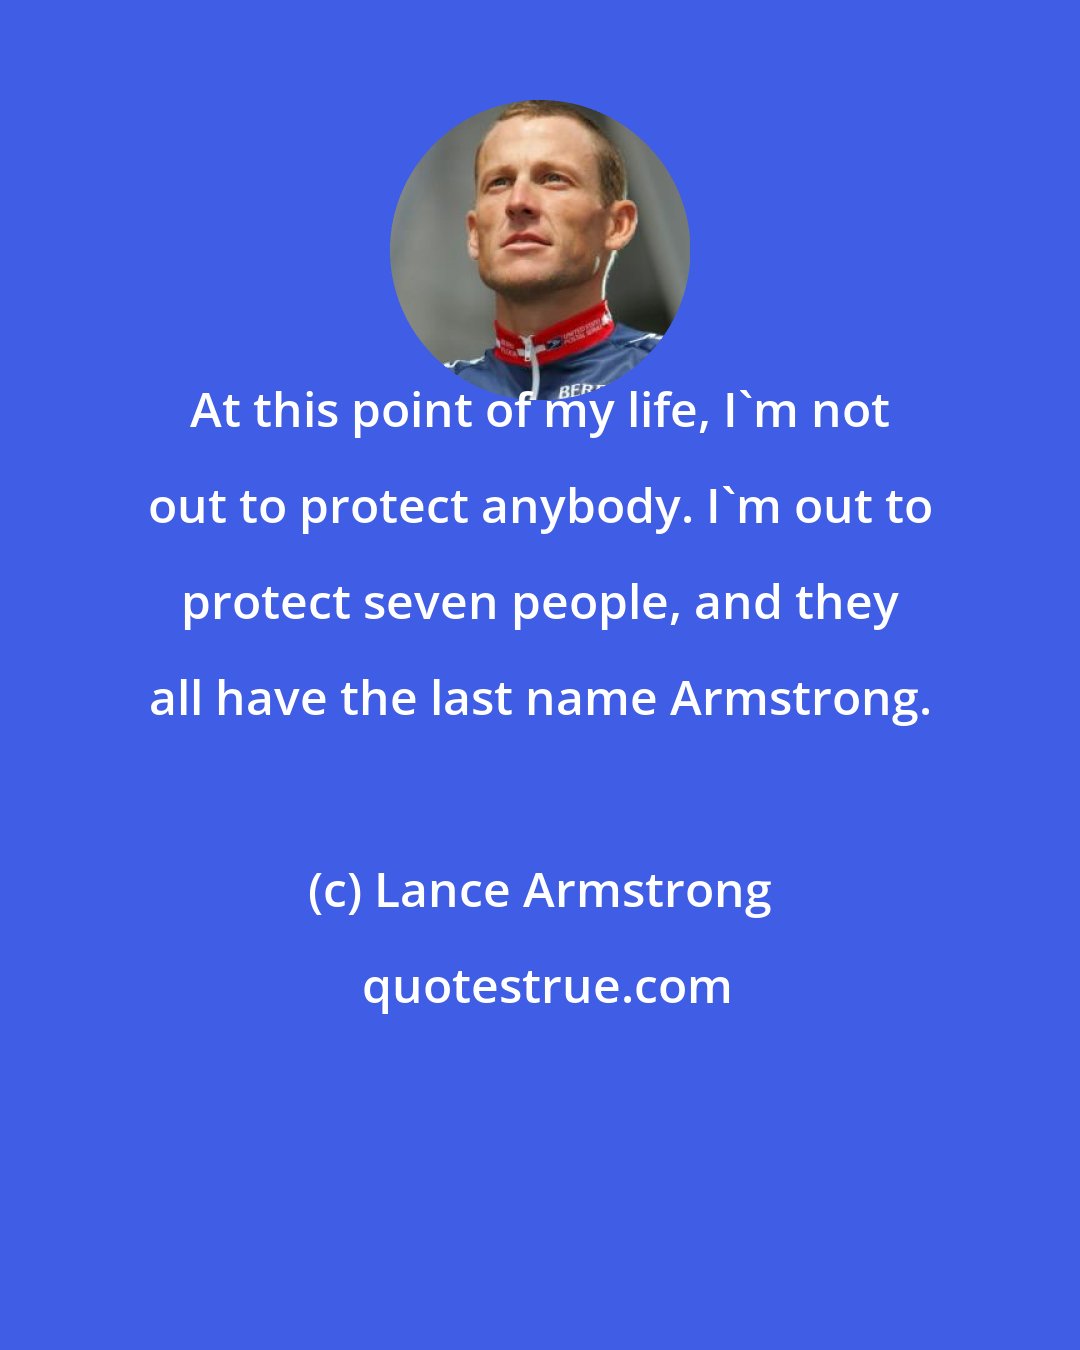 Lance Armstrong: At this point of my life, I'm not out to protect anybody. I'm out to protect seven people, and they all have the last name Armstrong.